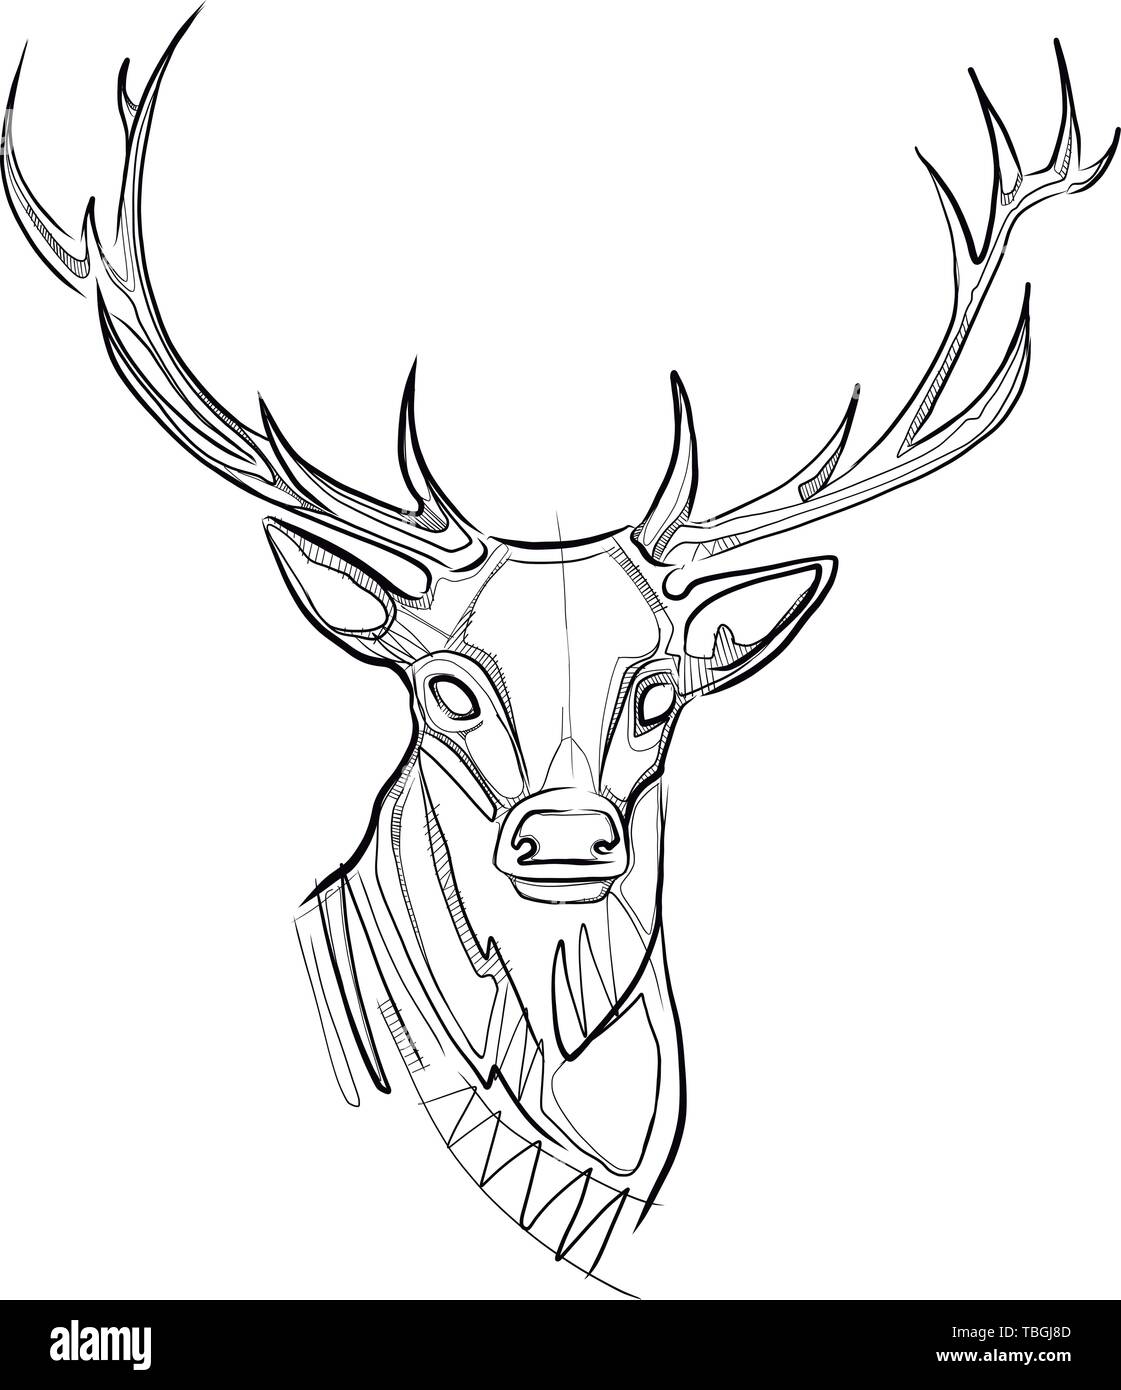 Picture Library Download Deer Heads Small Clip Art  Small Deer Head Drawing  Transparent PNG  378x598  Free Download on NicePNG